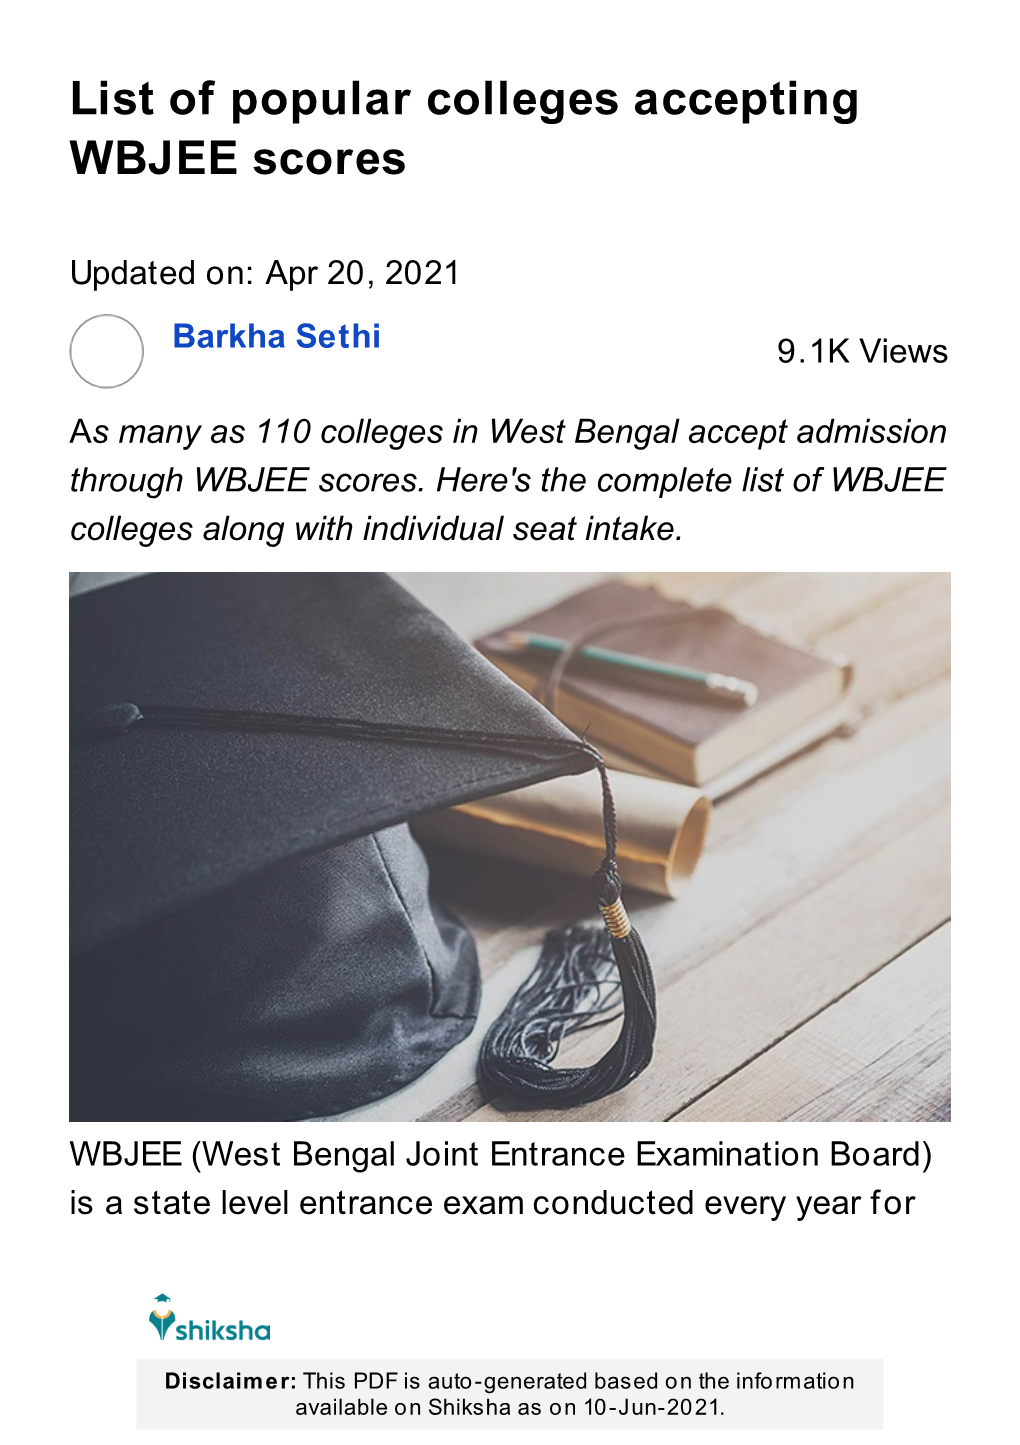 List of Popular Colleges Accepting WBJEE Scores